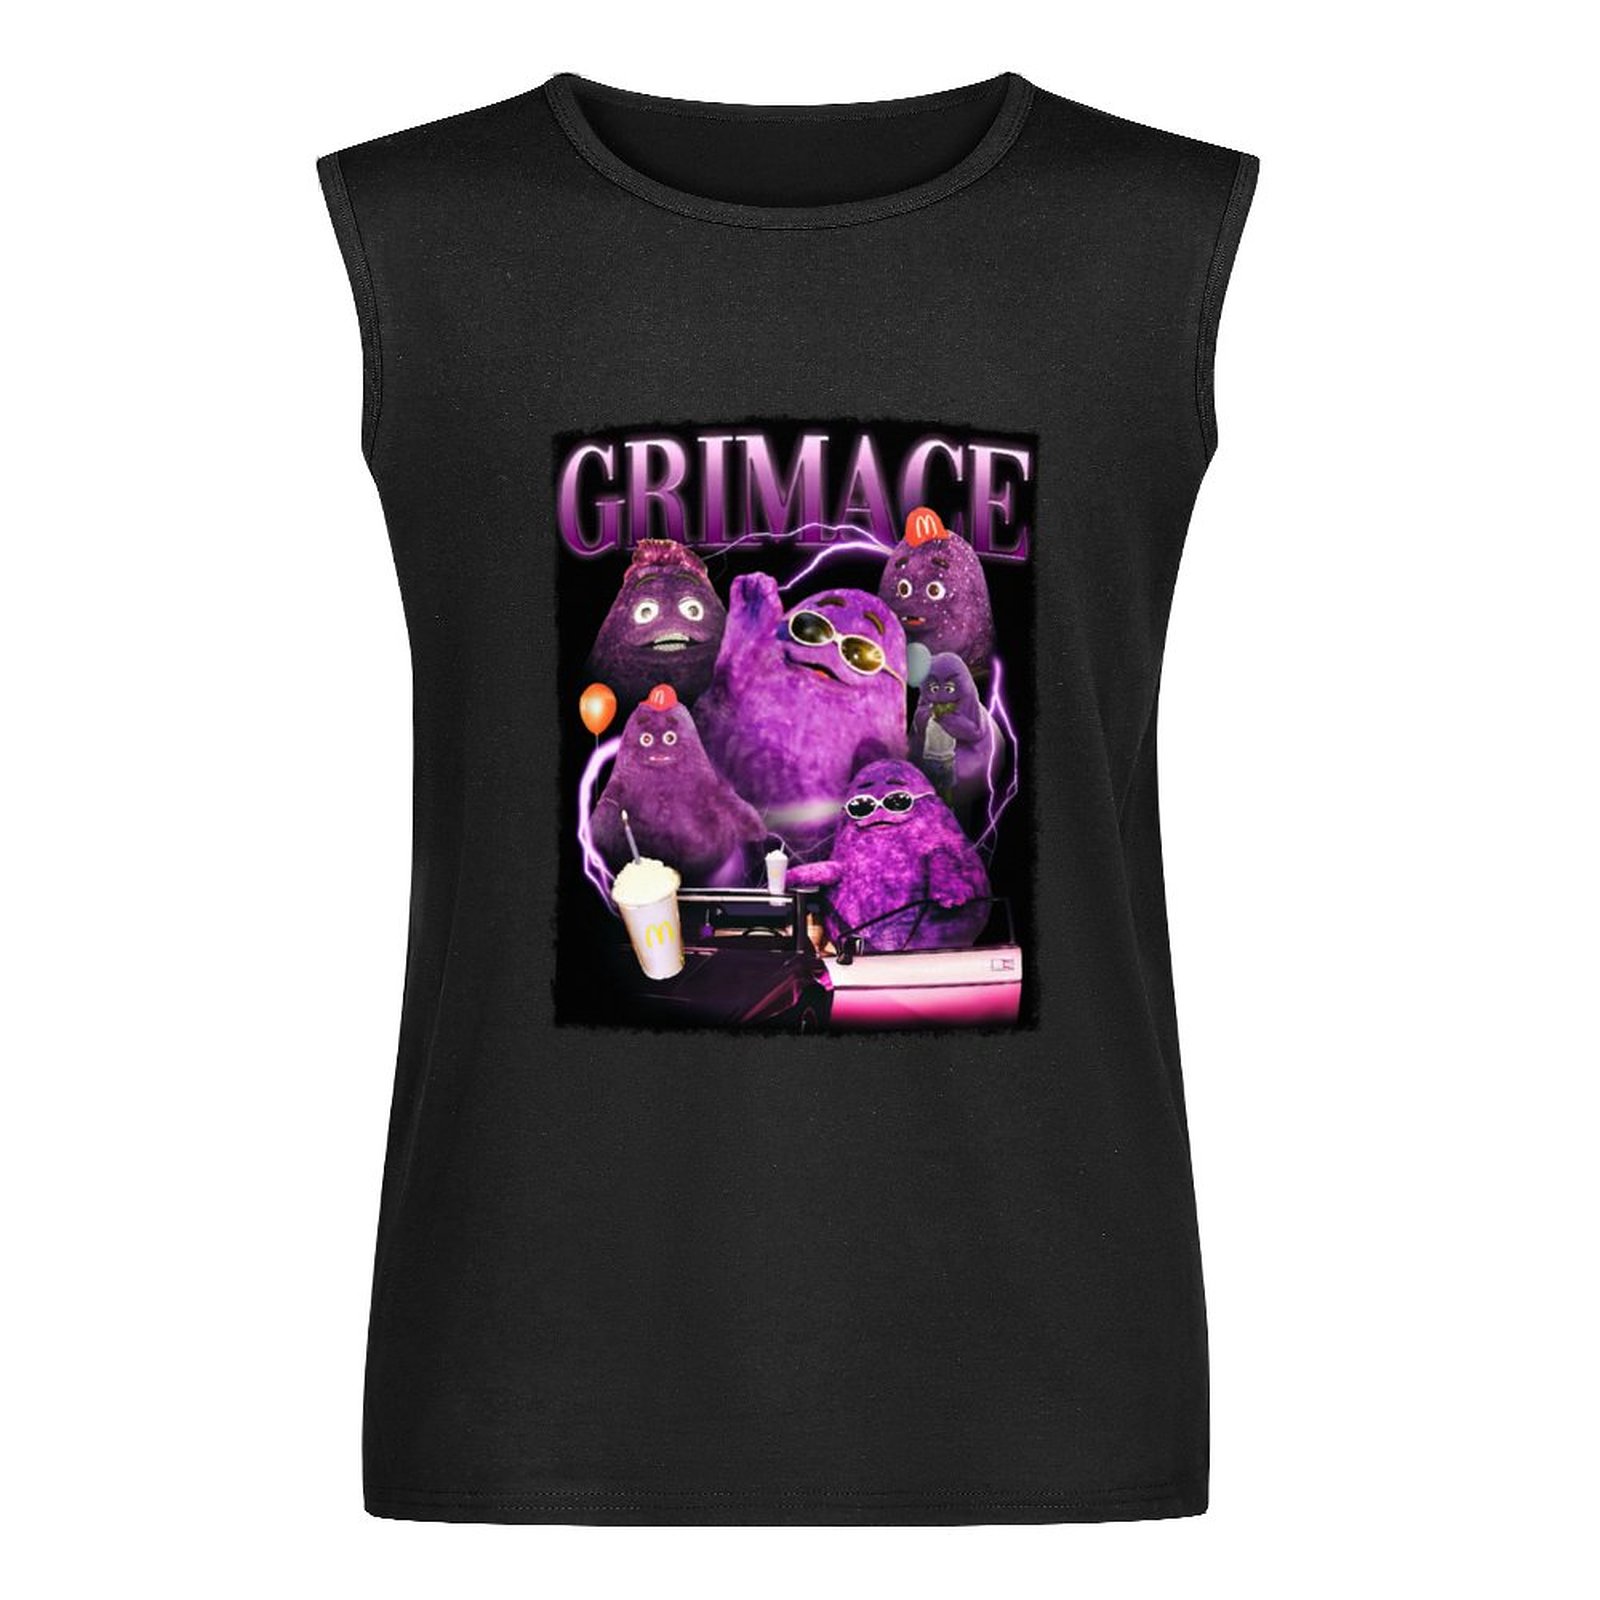 New Grimace in 90s Y2k Style Tribute Tank Top Vest gym top clothes for men summer 3 - Grimace Plush